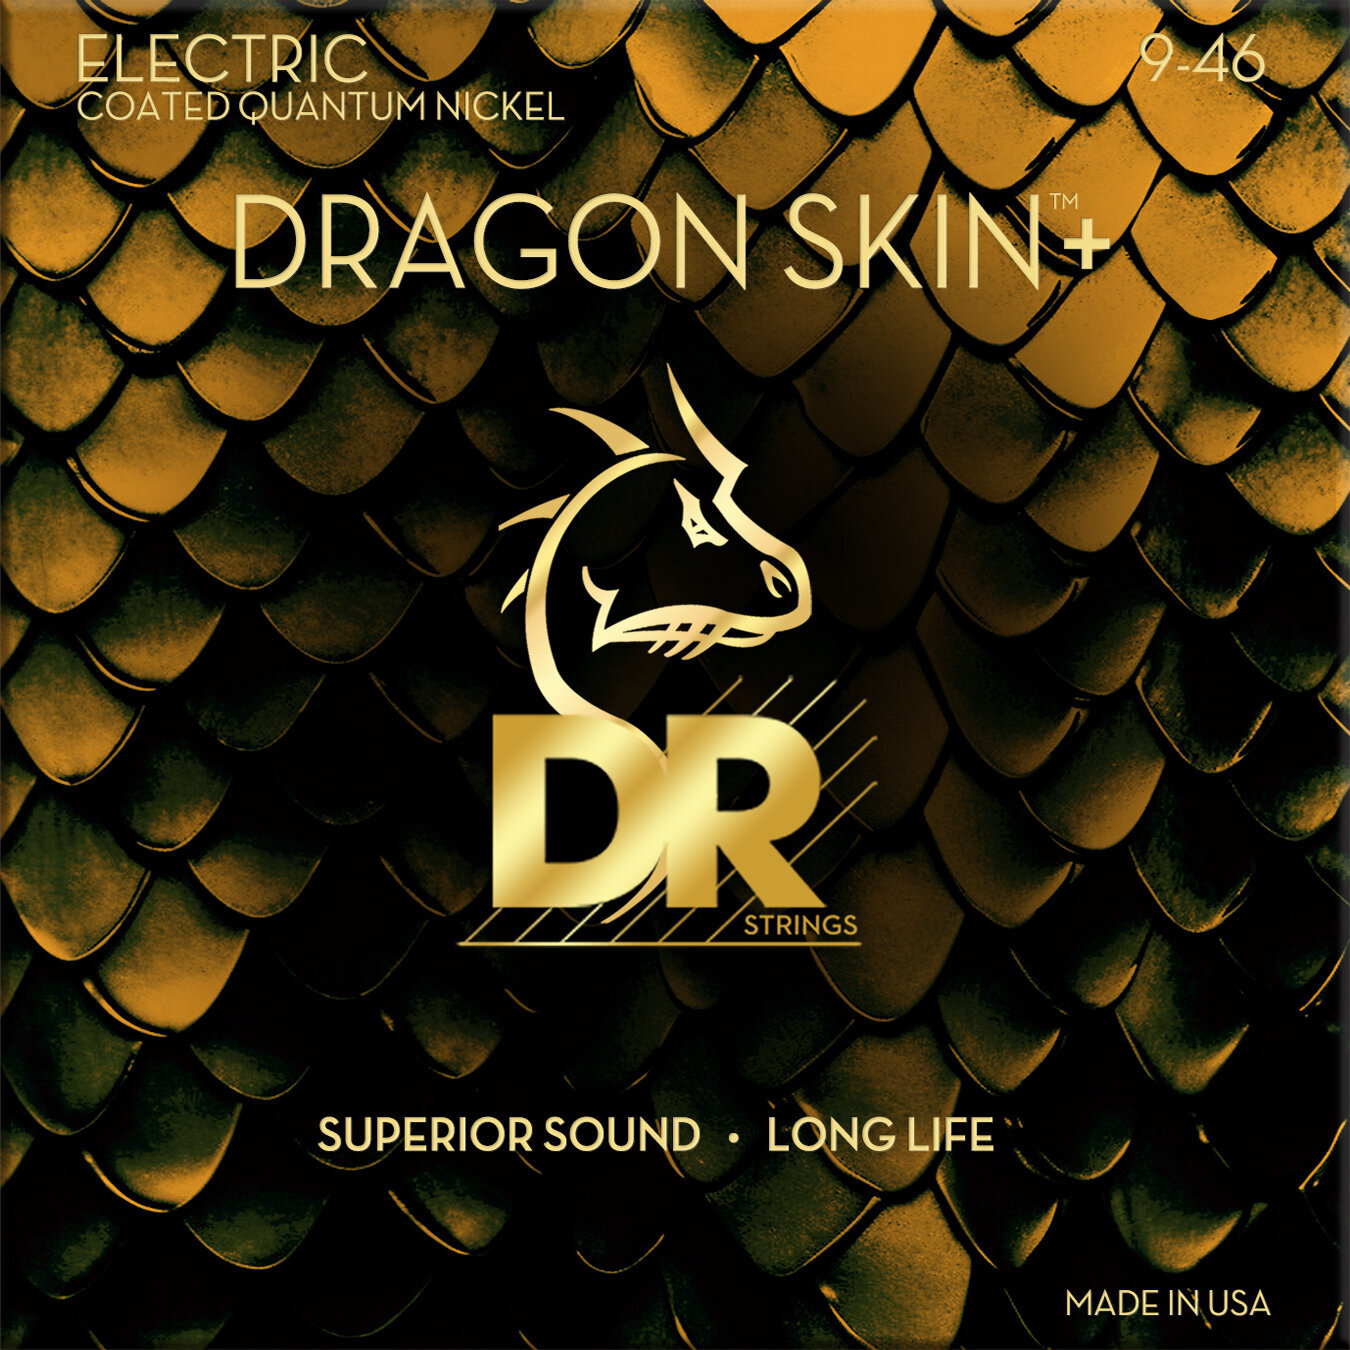 Corzi chitare electrice DR Strings Dragon Skin+ Coated Light to Medium 9-46